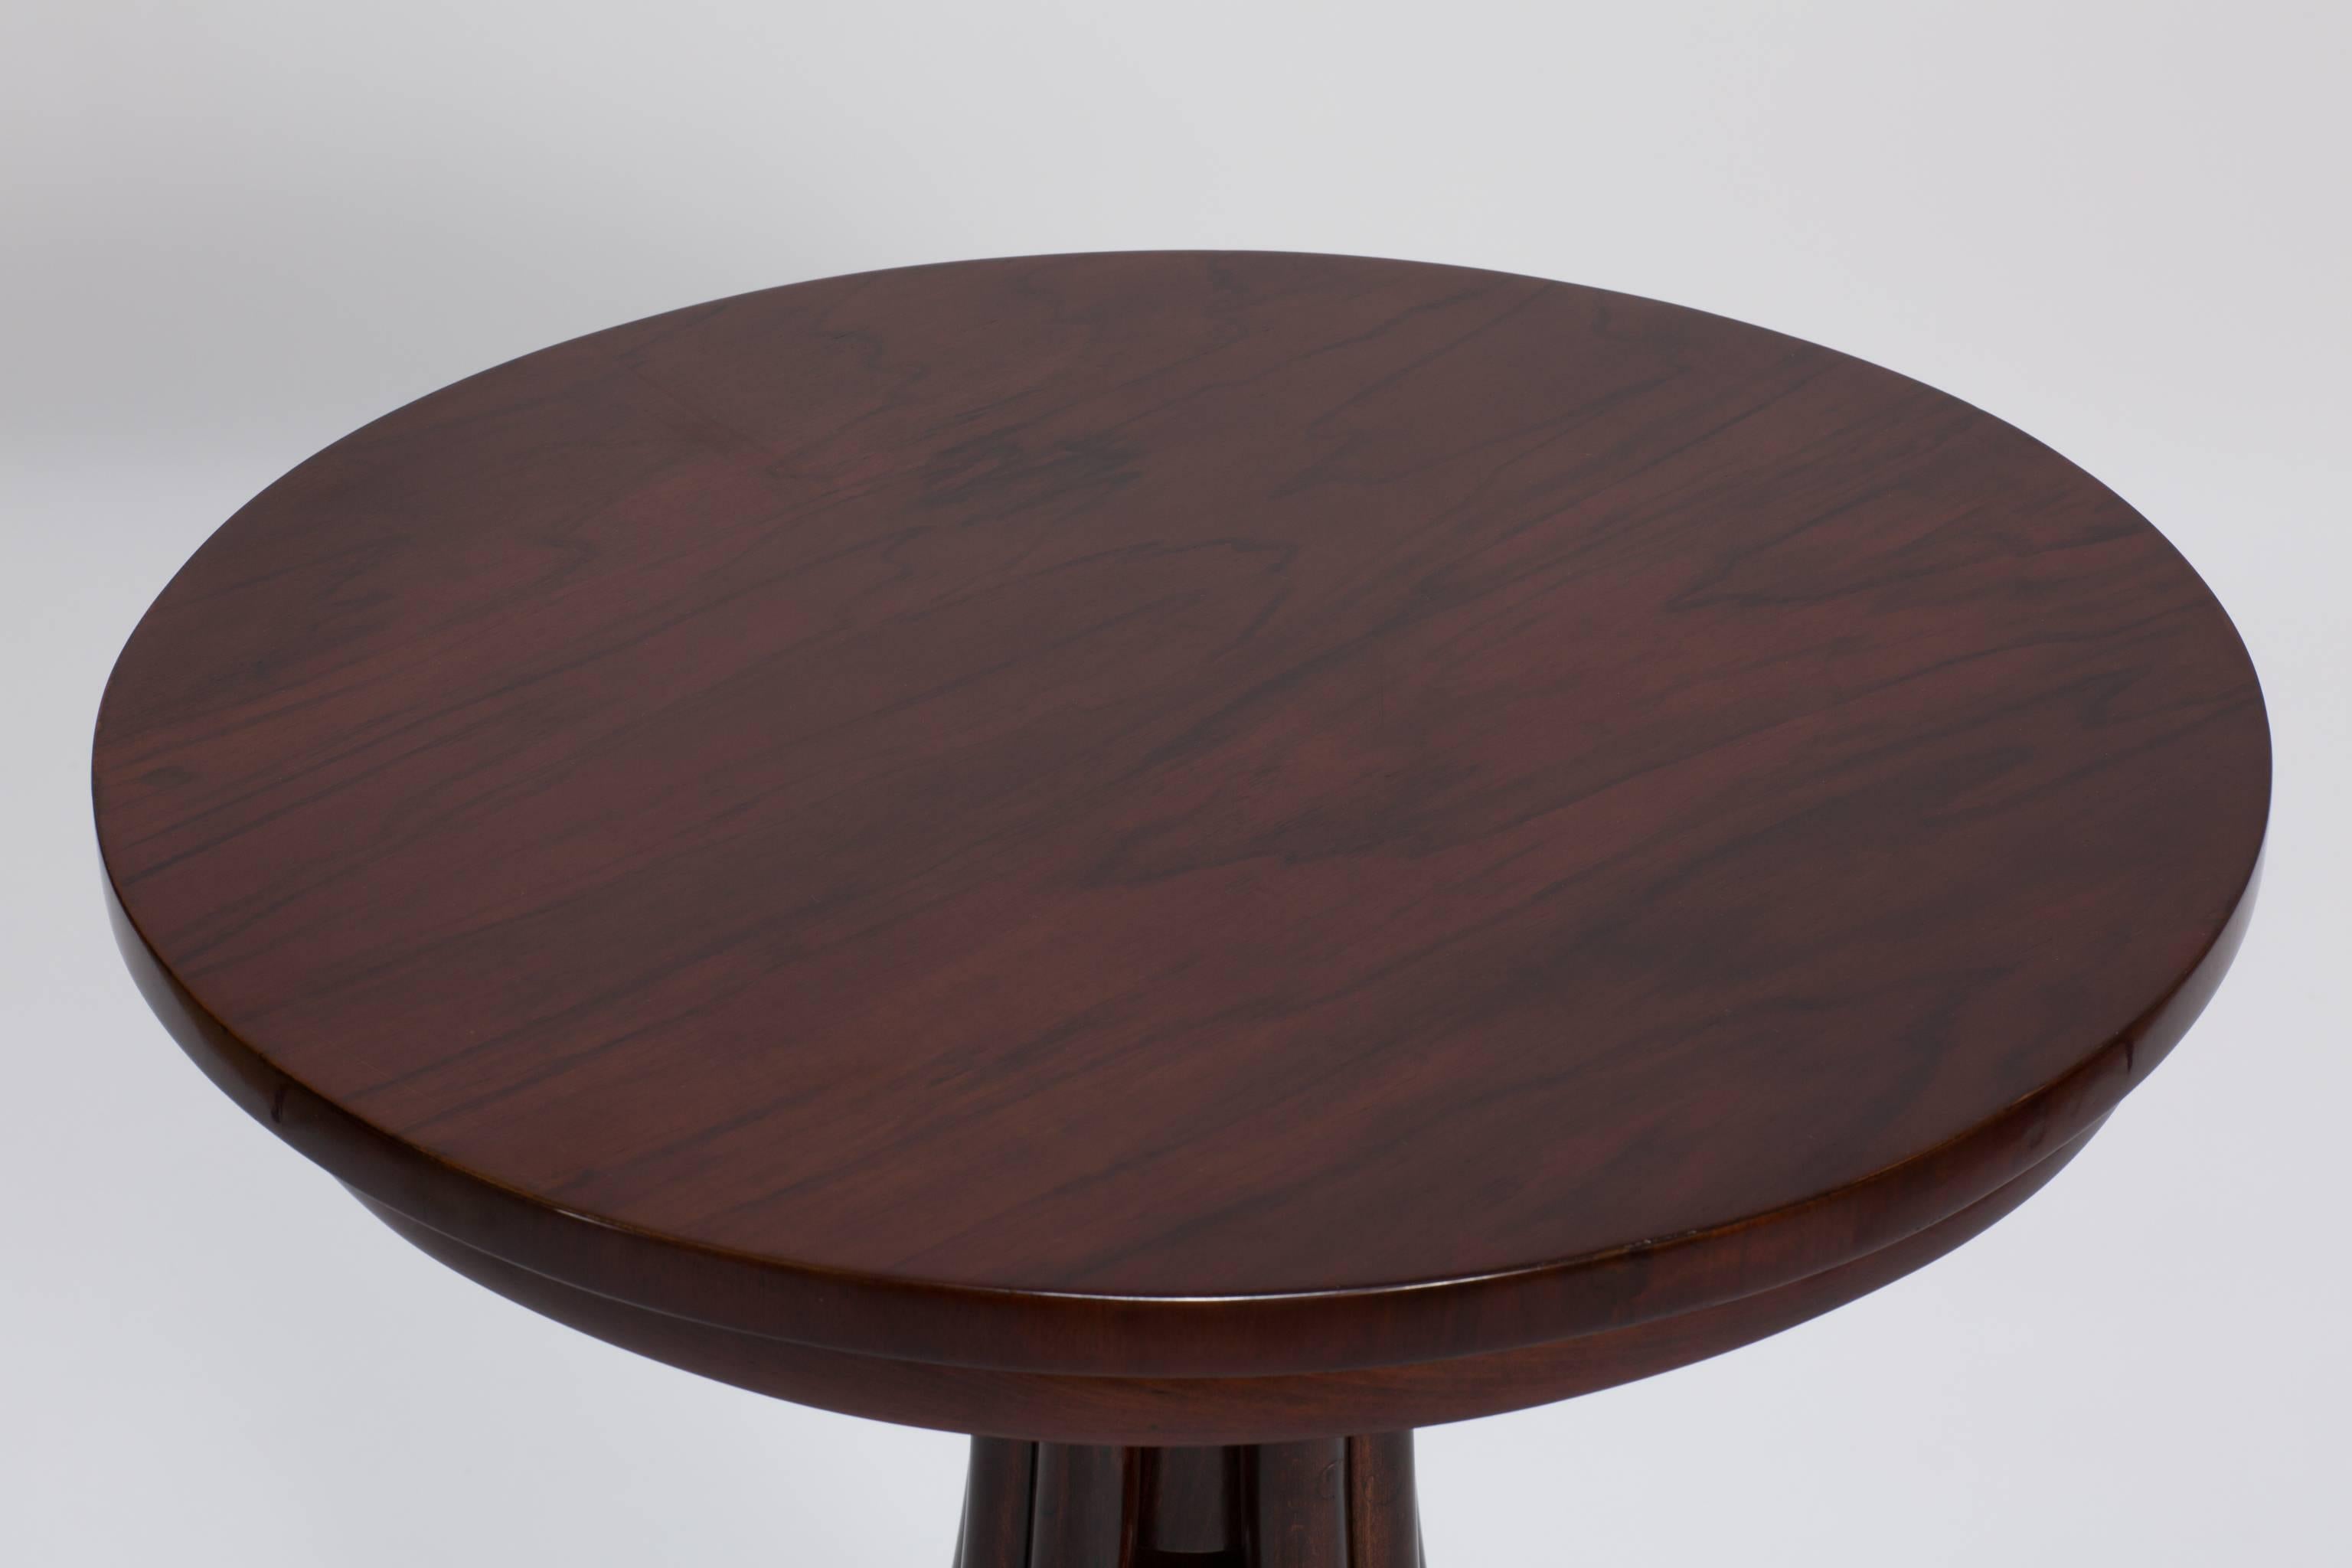 This stylish antique Thonet bentwood table from the late 19th century is a good representation of the Art Nouveau movement with its very fine display of craftsmanship which is exhibited in the details such as the spindle and the elegantly bent table